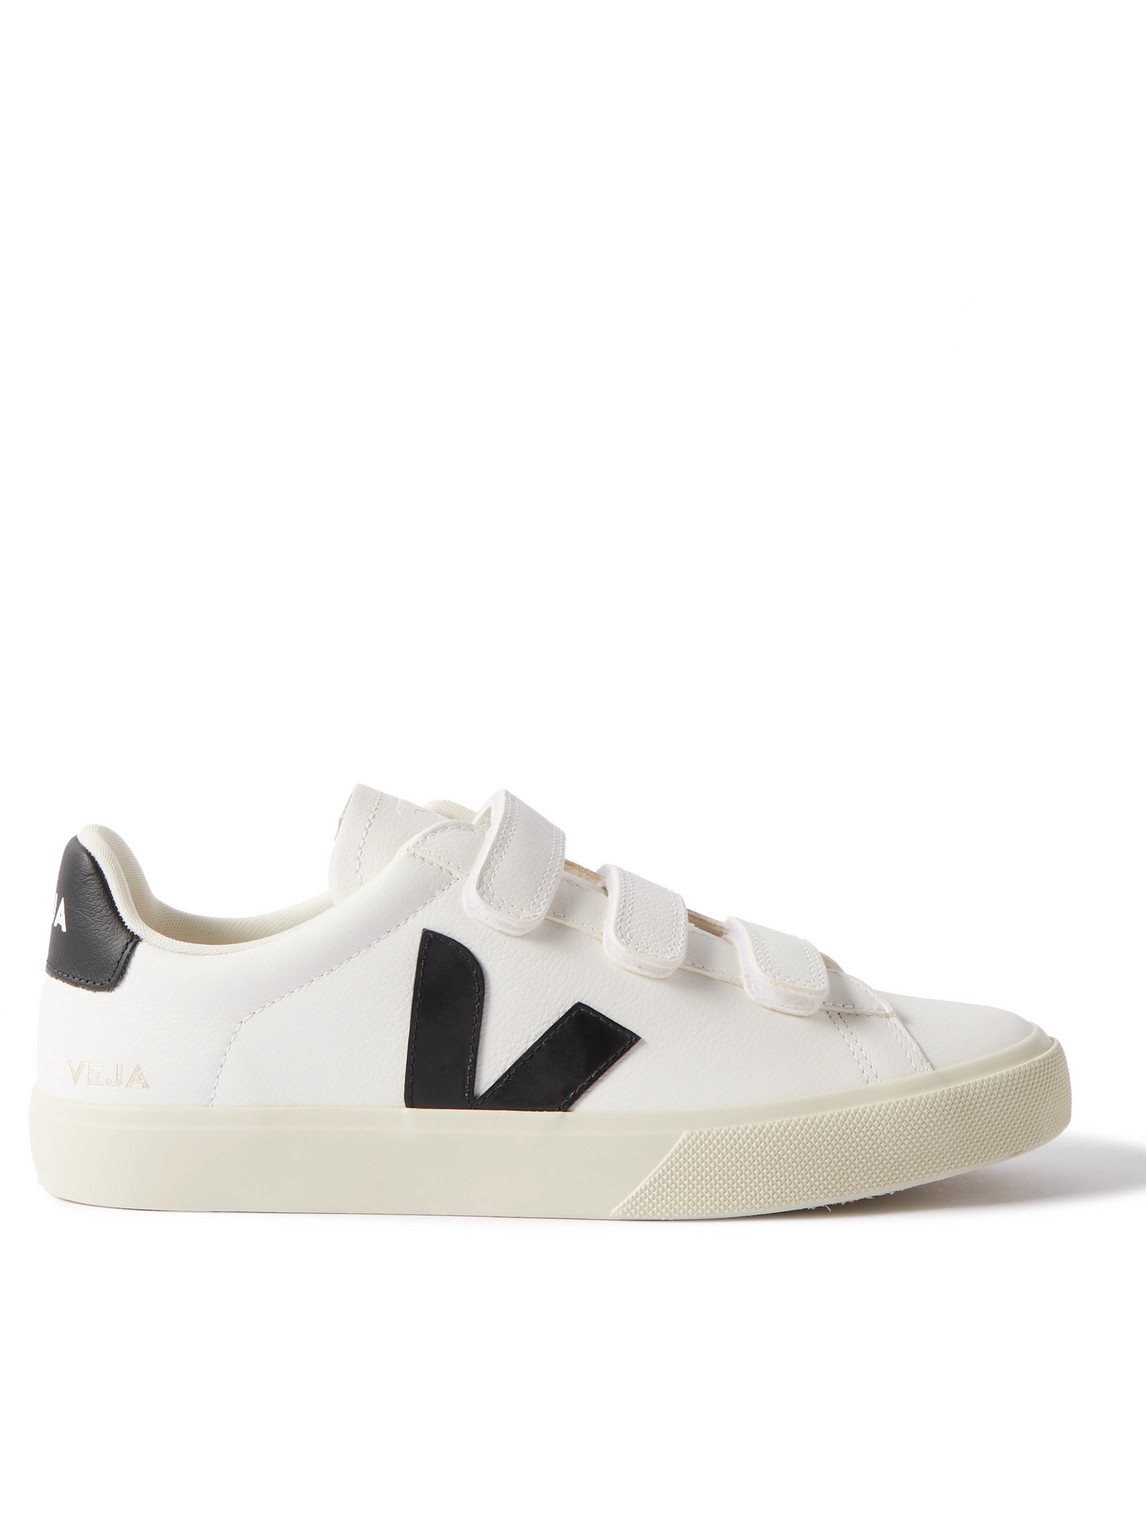 Veja Recife Rubber-Trimmed Leather Sneakers